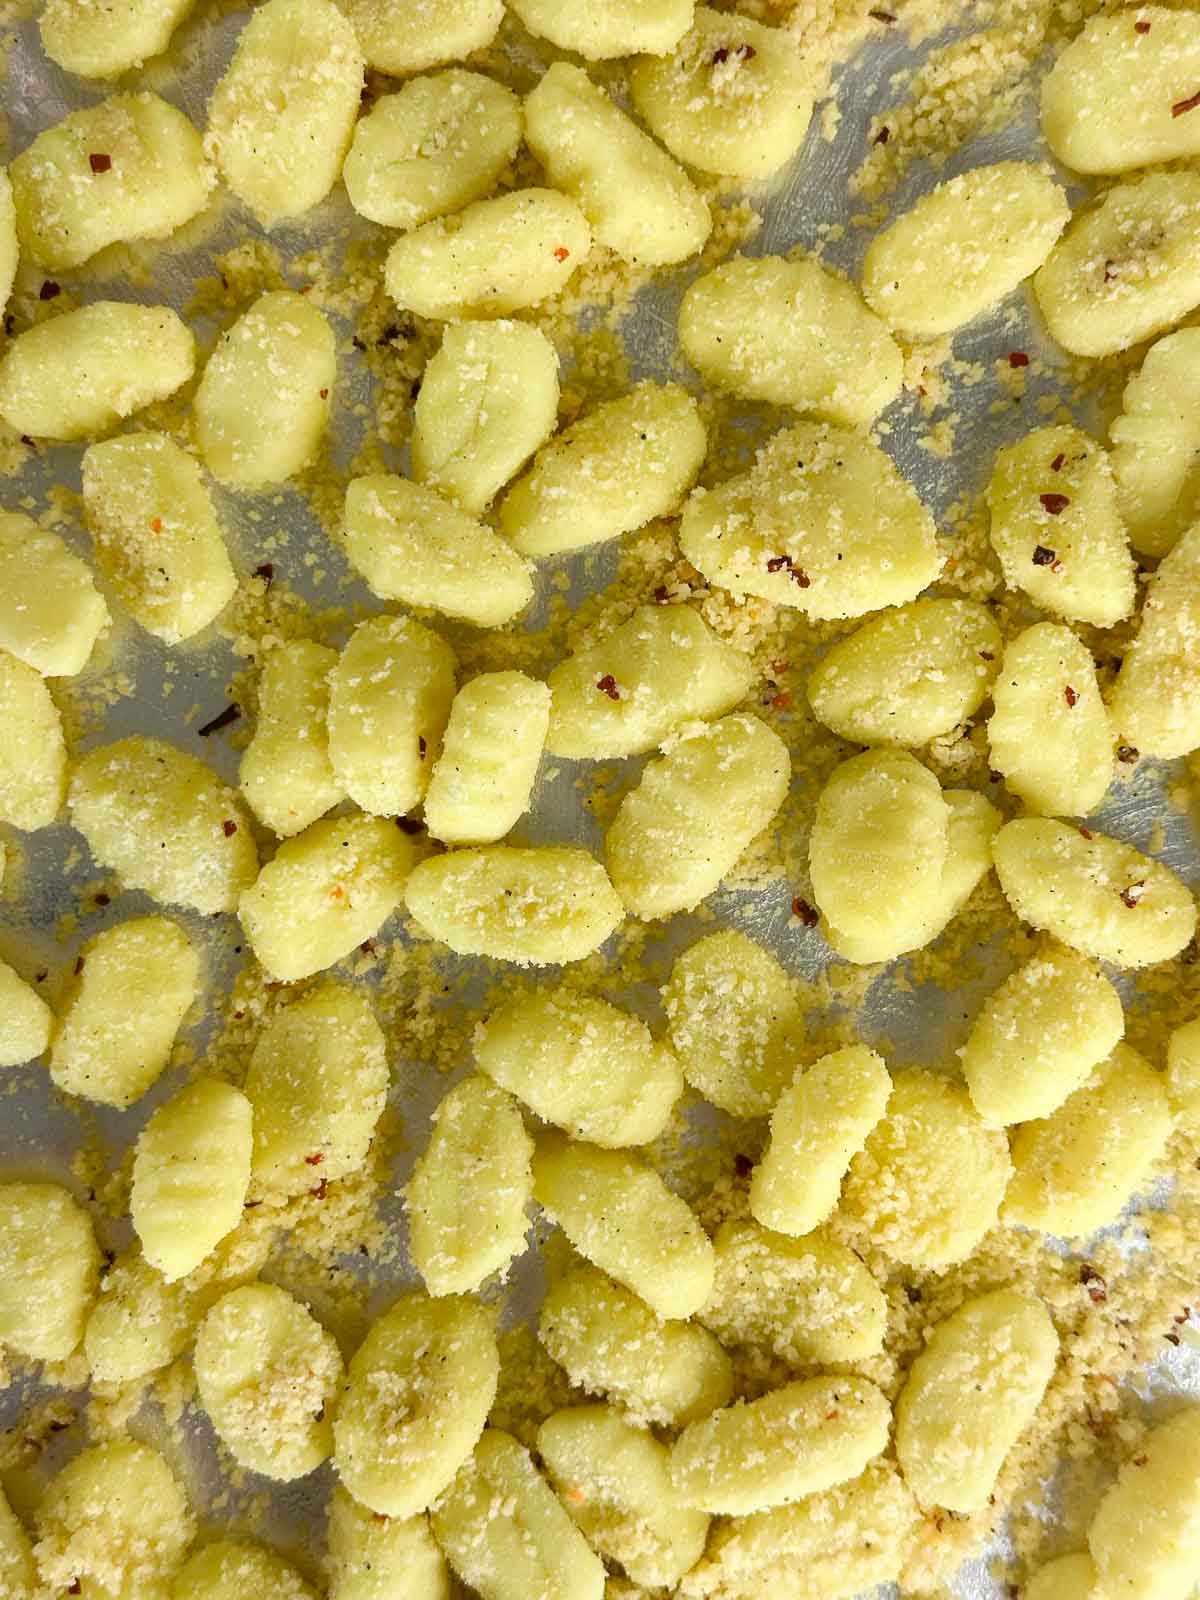 Spread the coated gnocchi out on a baking sheet lined with foil.